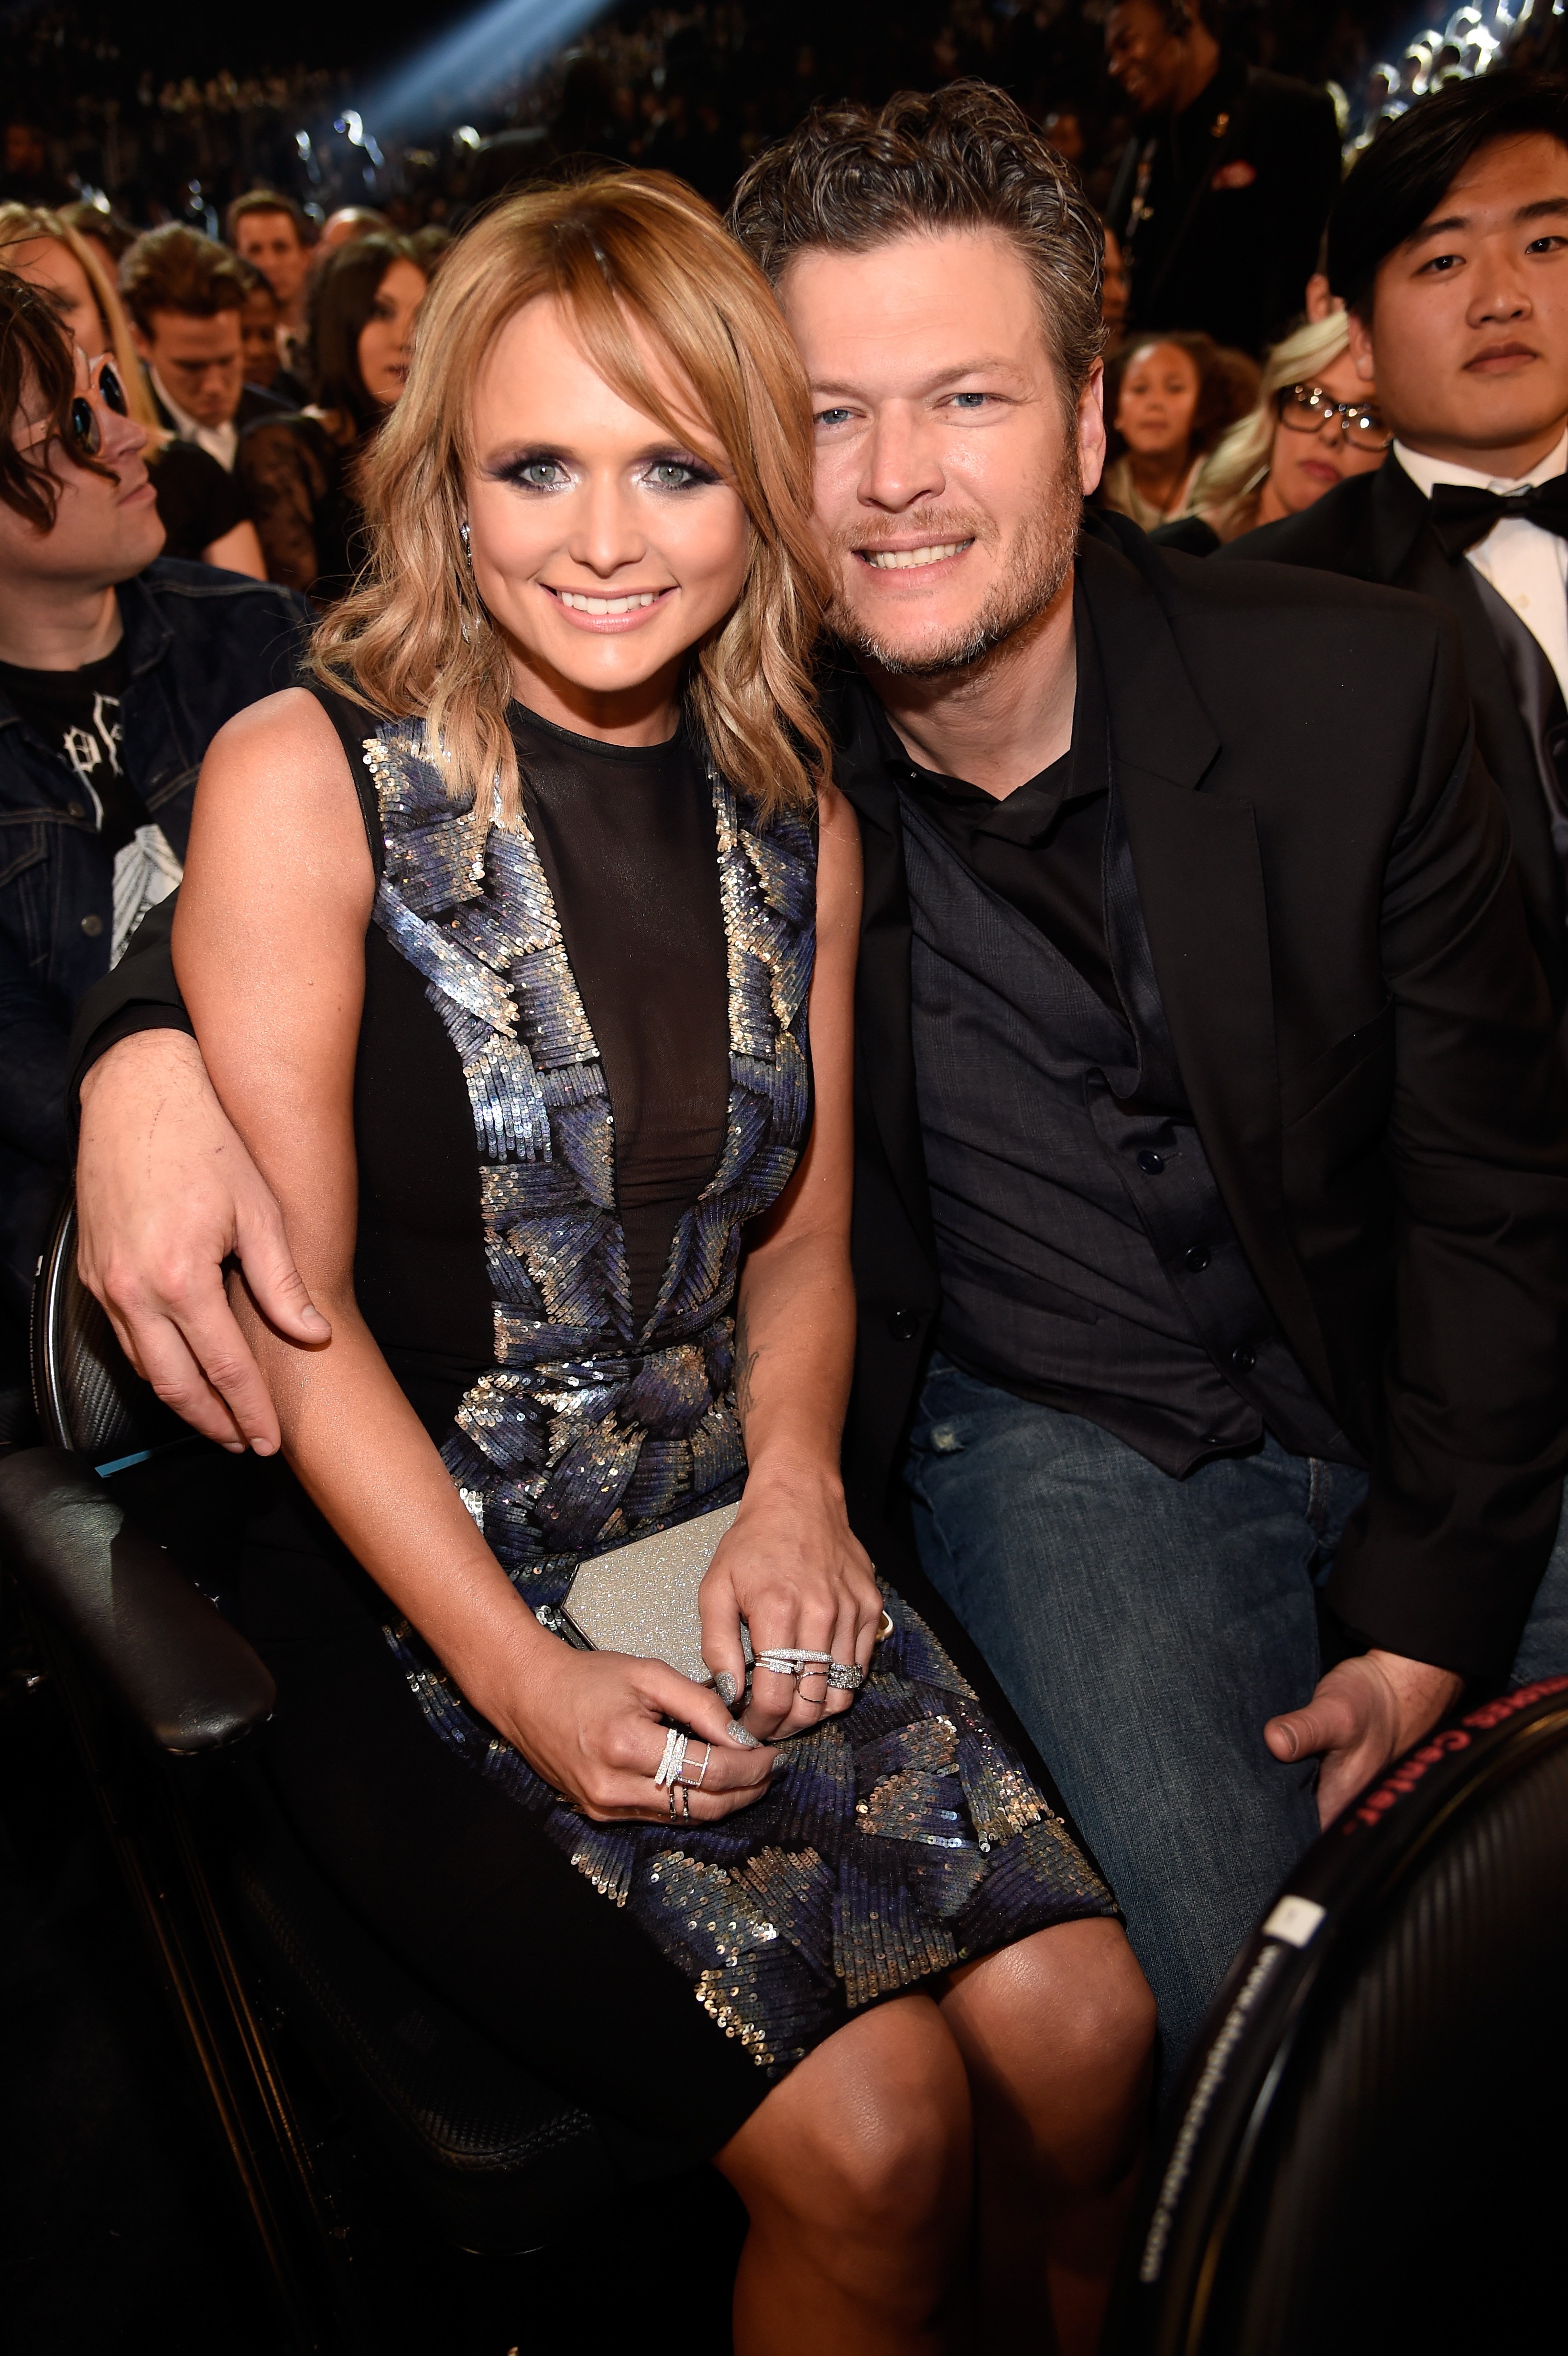 Singers Miranda Lambert and Blake Shelton during the 57th Annual Grammy Awards at Staples Center on February 8, 2015 in Los Angeles, California. | Source: Getty Images